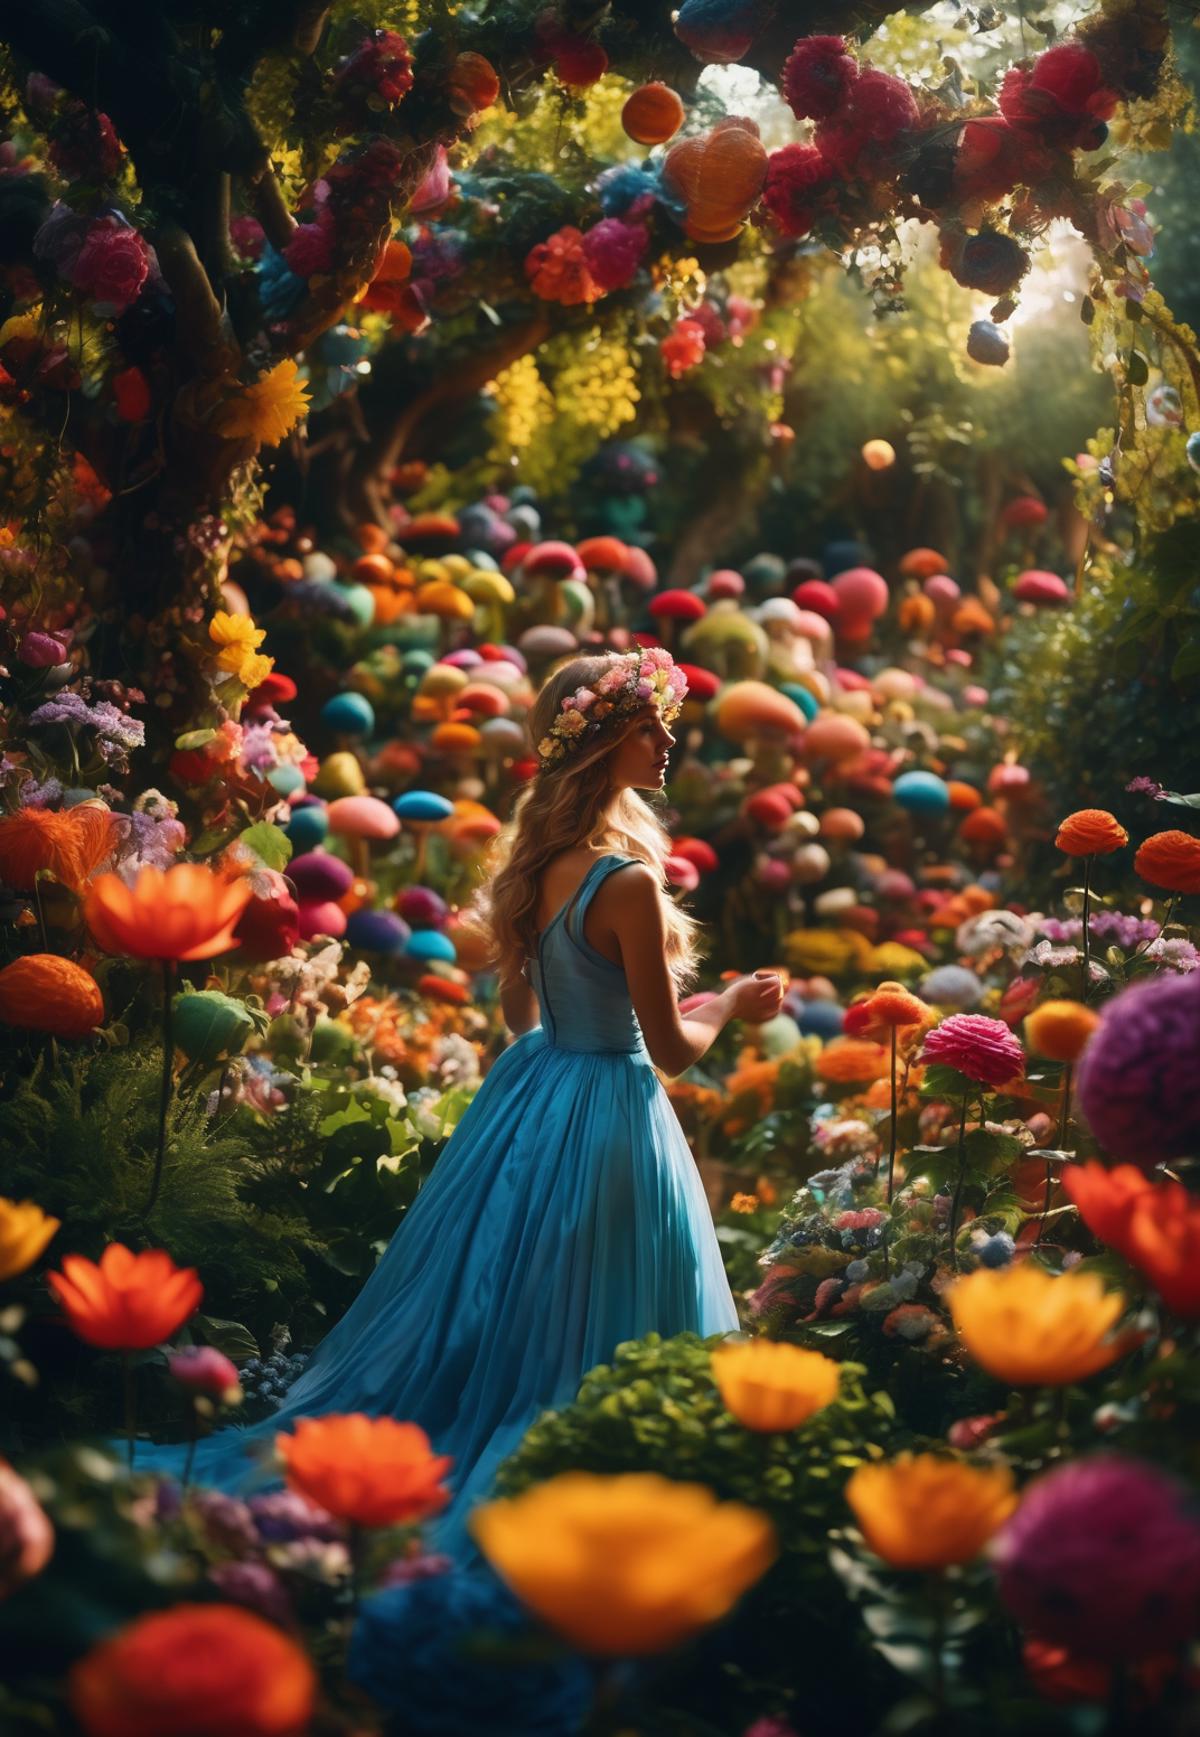 A woman in a blue dress standing in a field of flowers with a flowery crown in her hair.